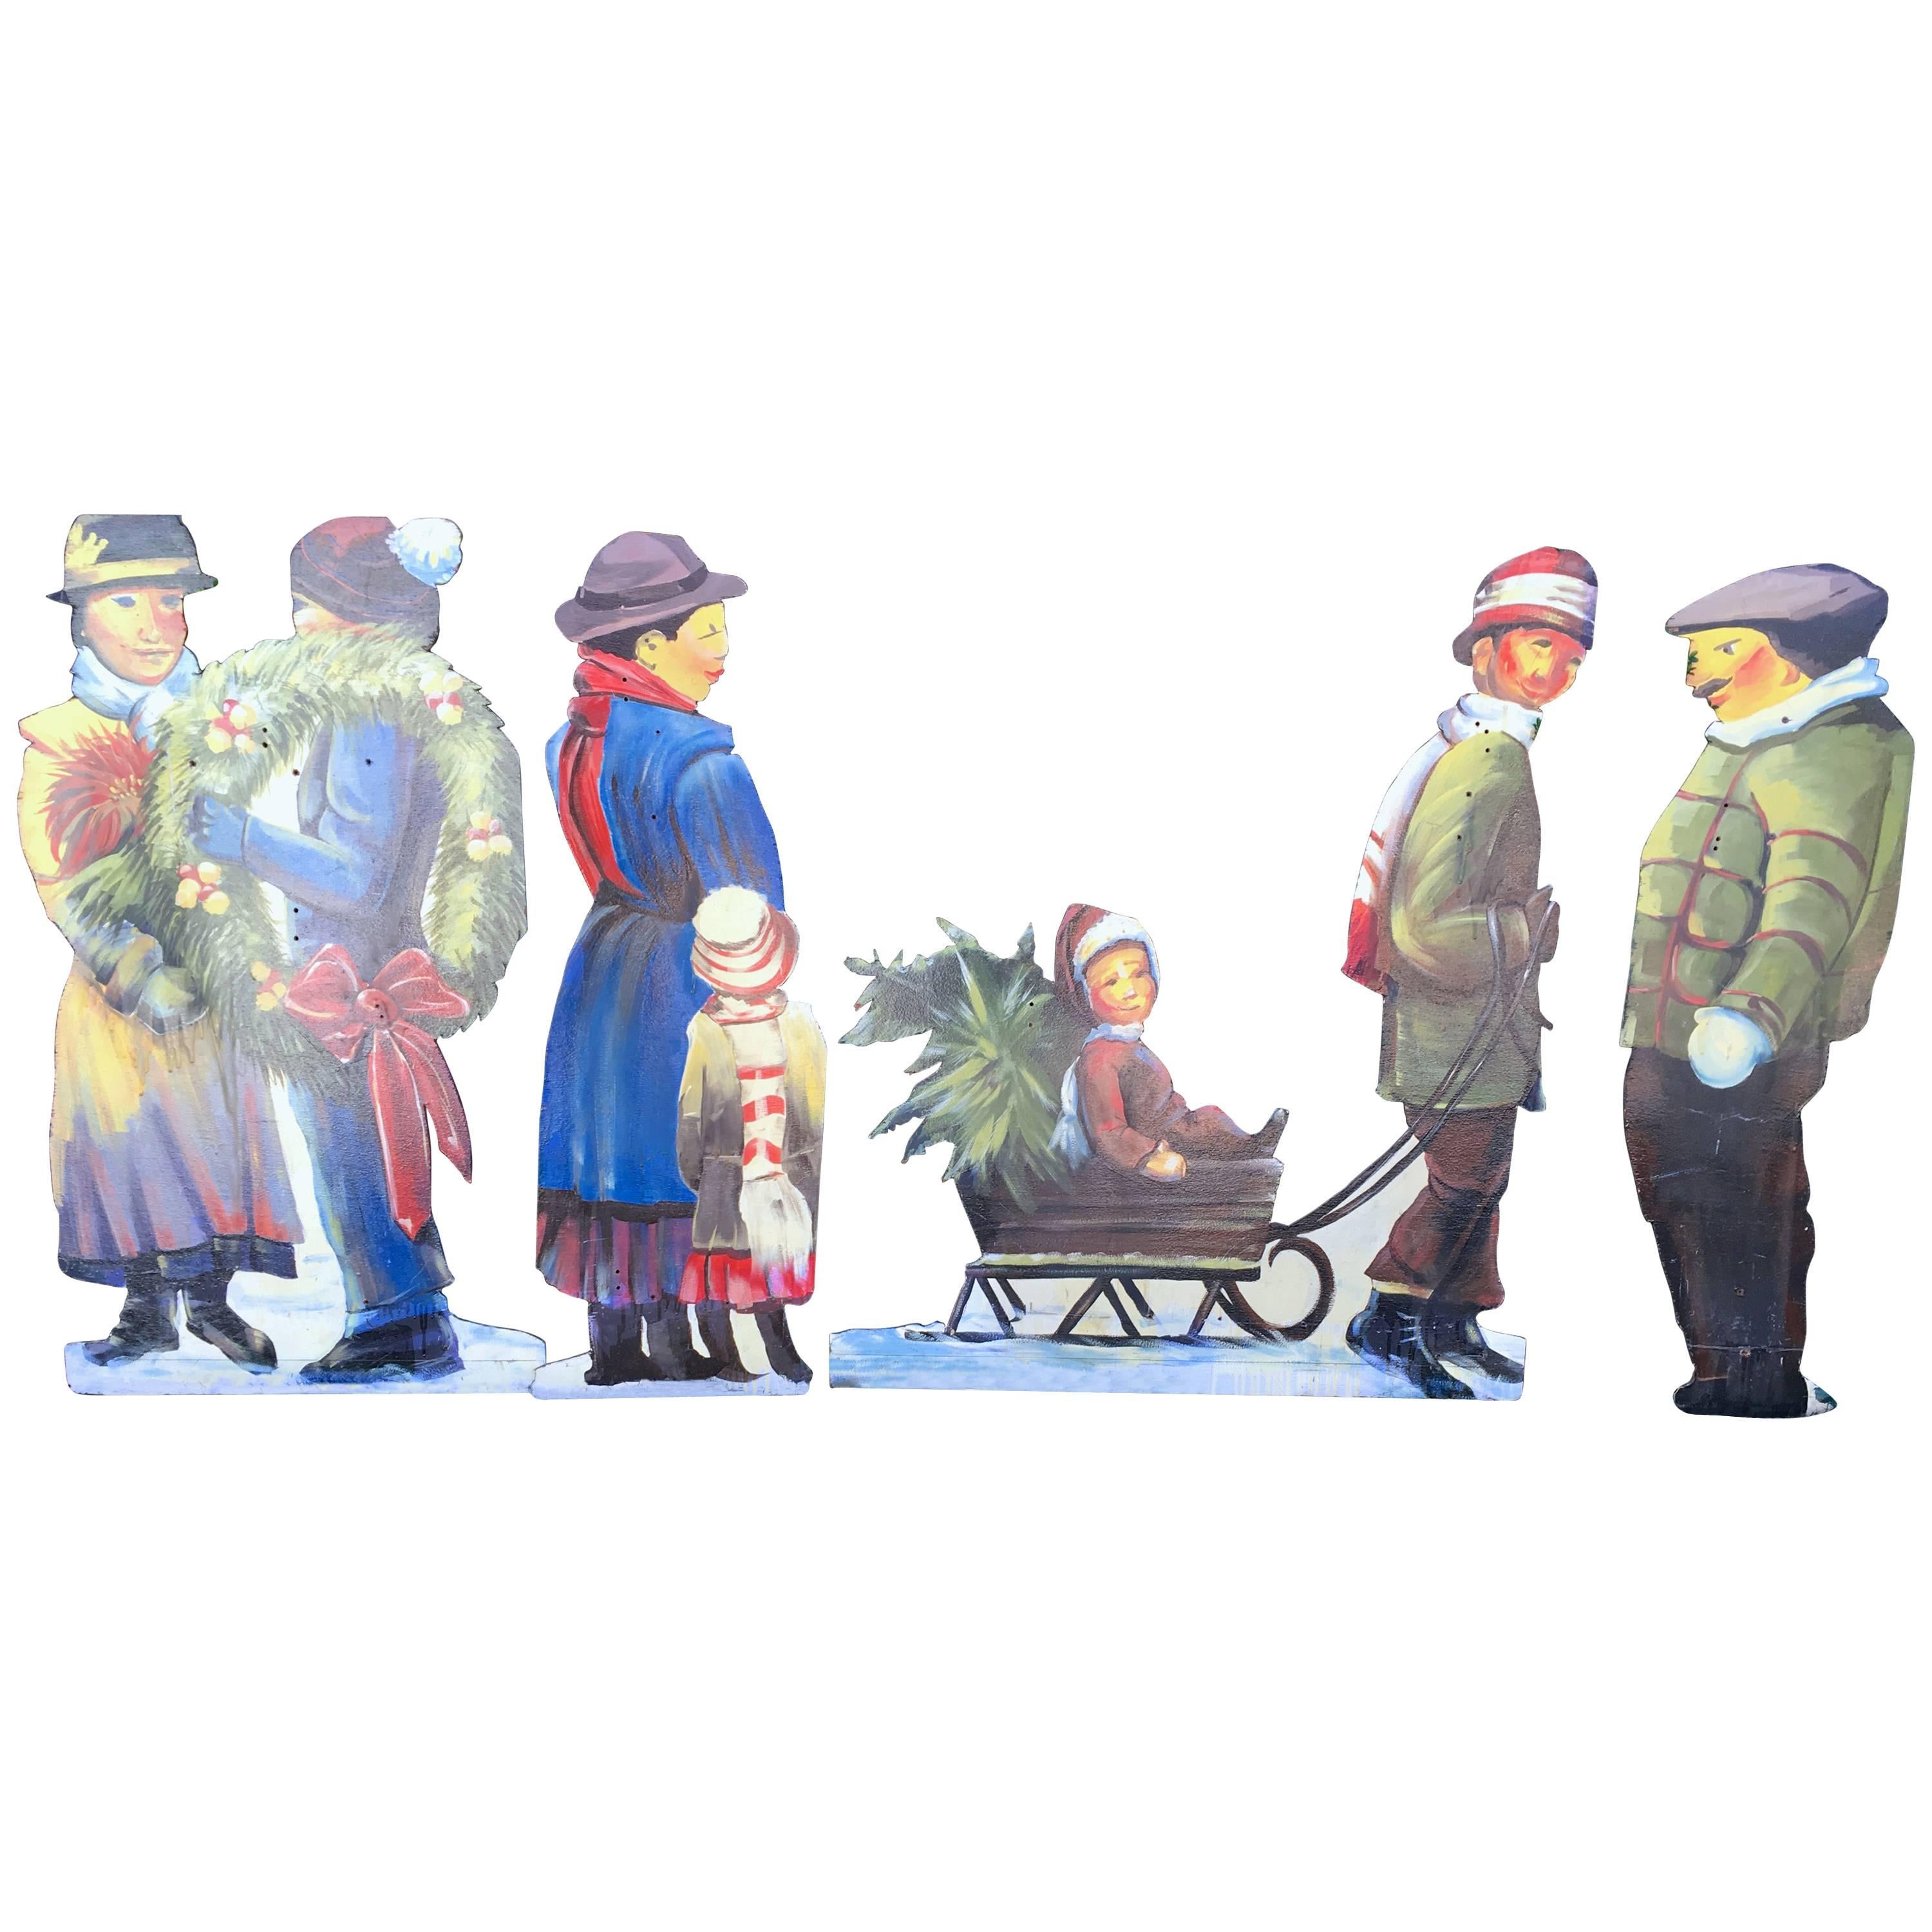 Set of Large Painted Holiday/Winter Village Scene Figures For Sale